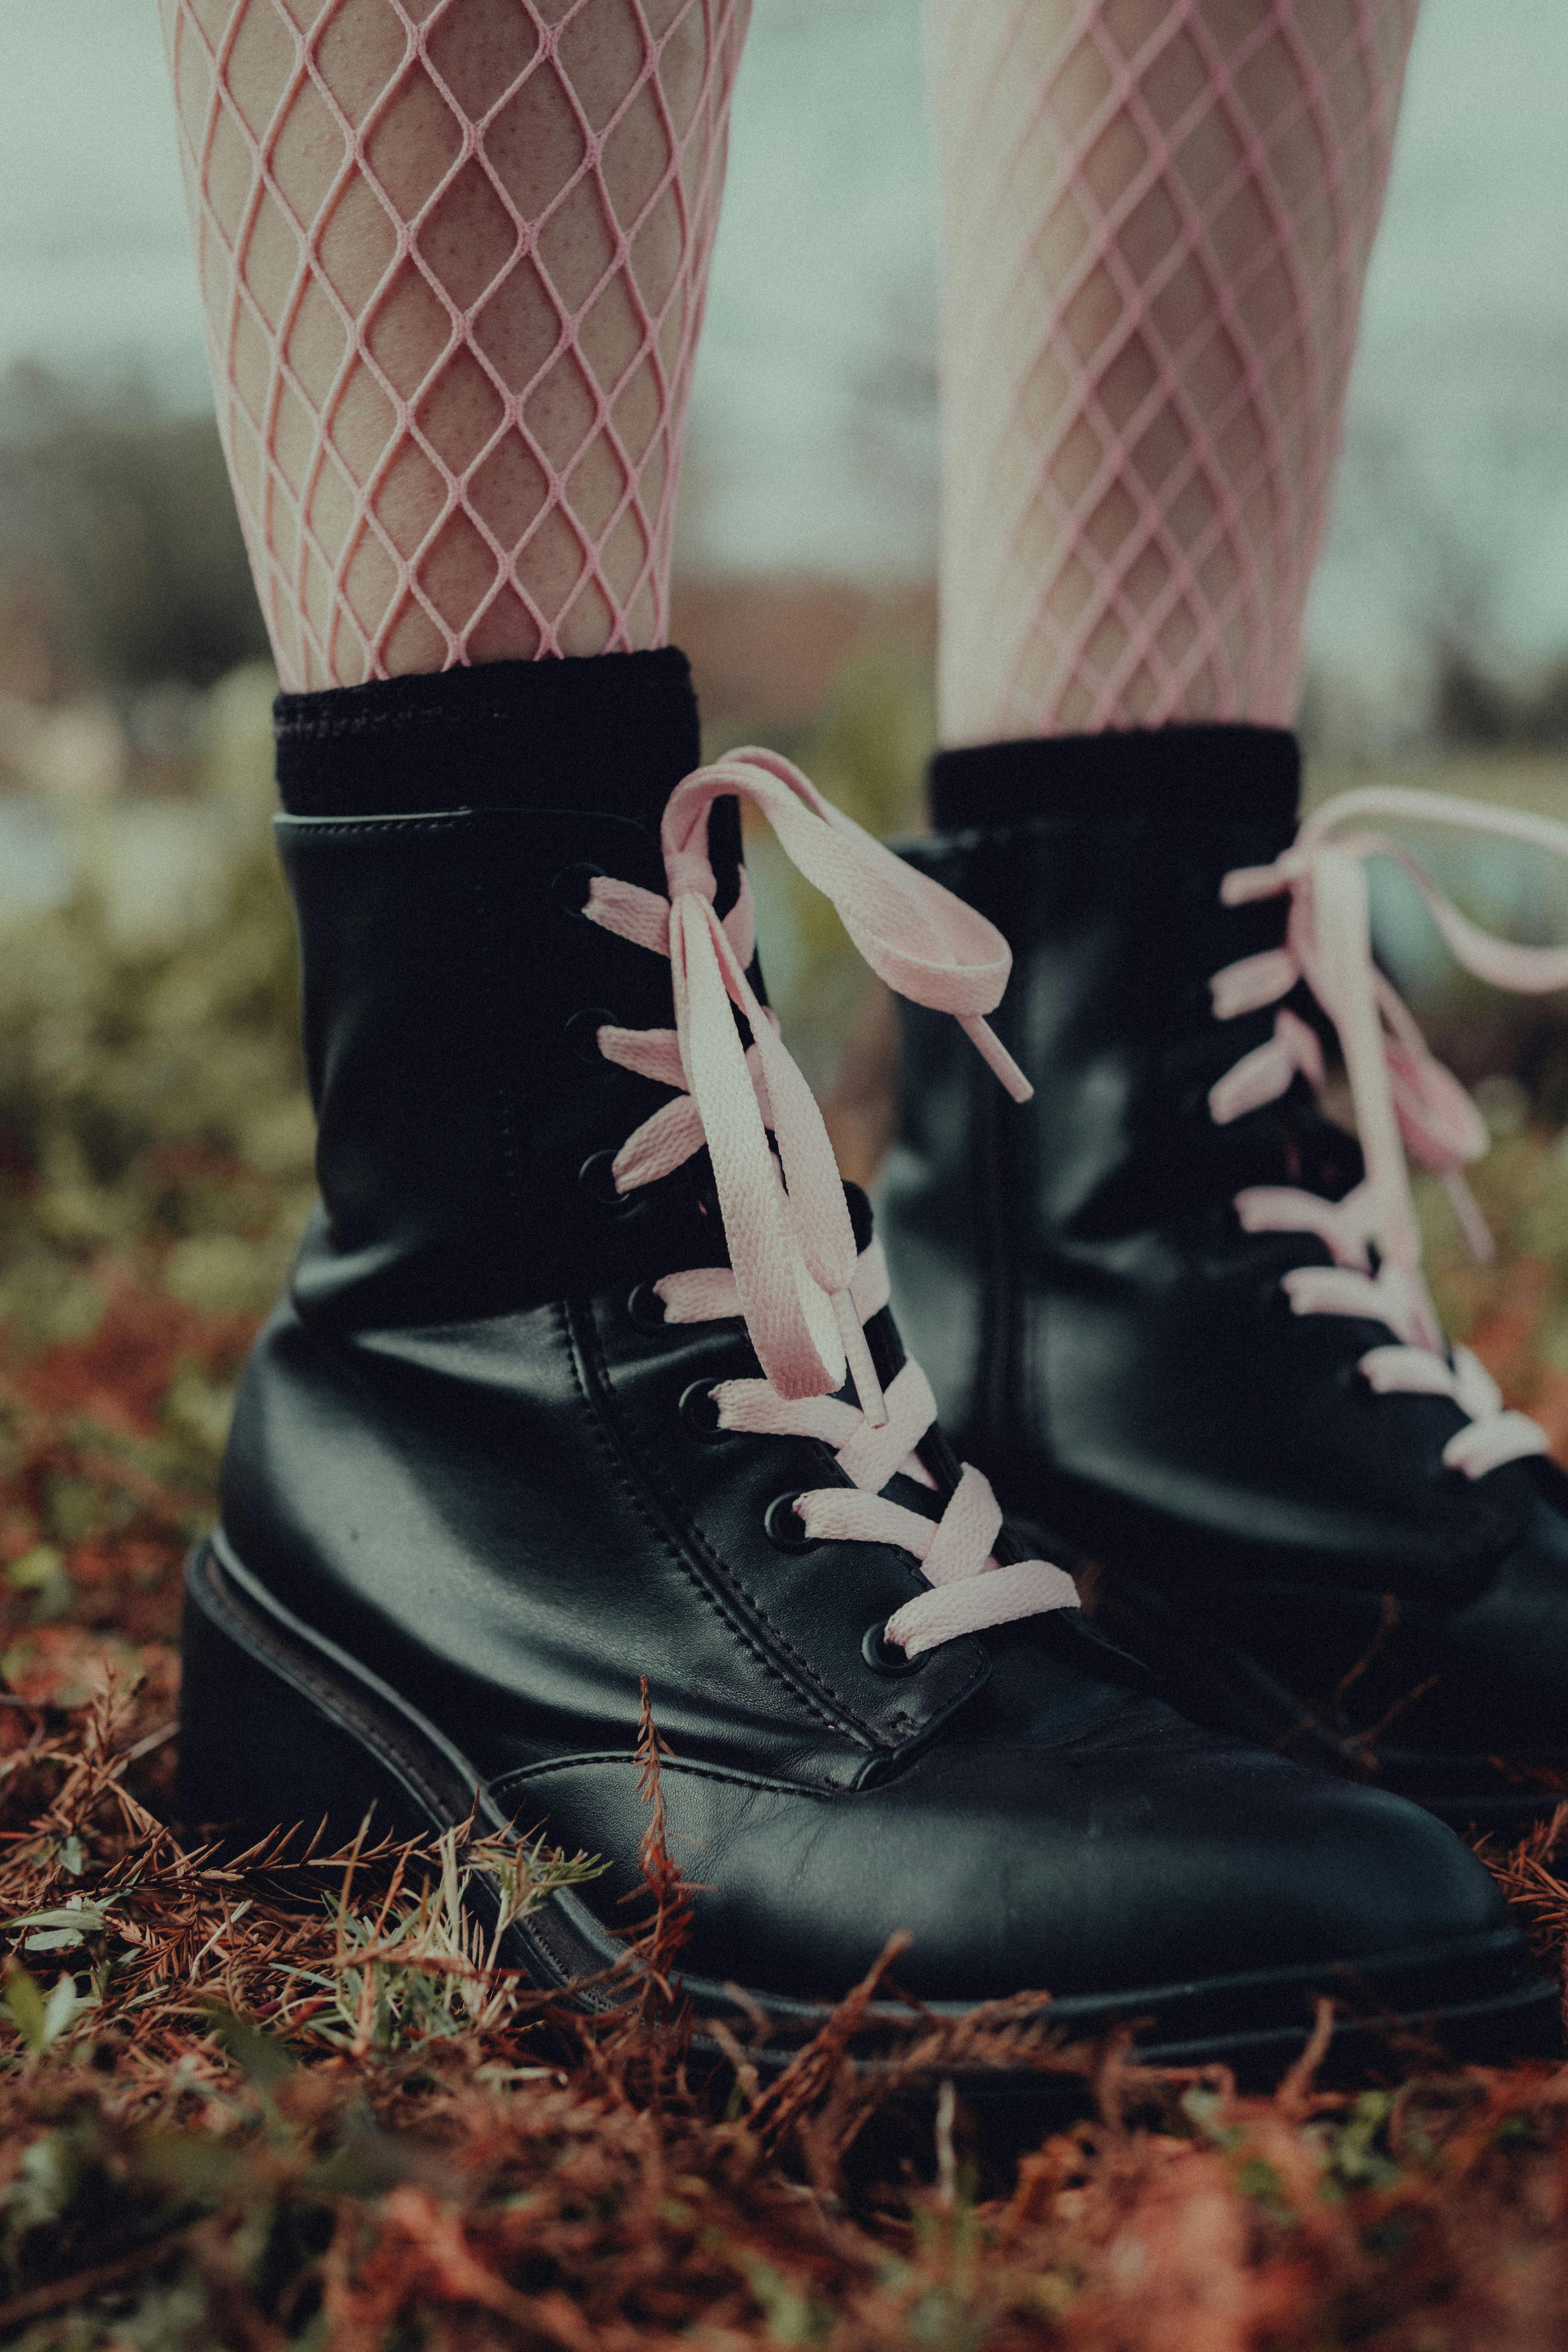 Pair of Black Lace-up Boots on Area Rug · Free Stock Photo